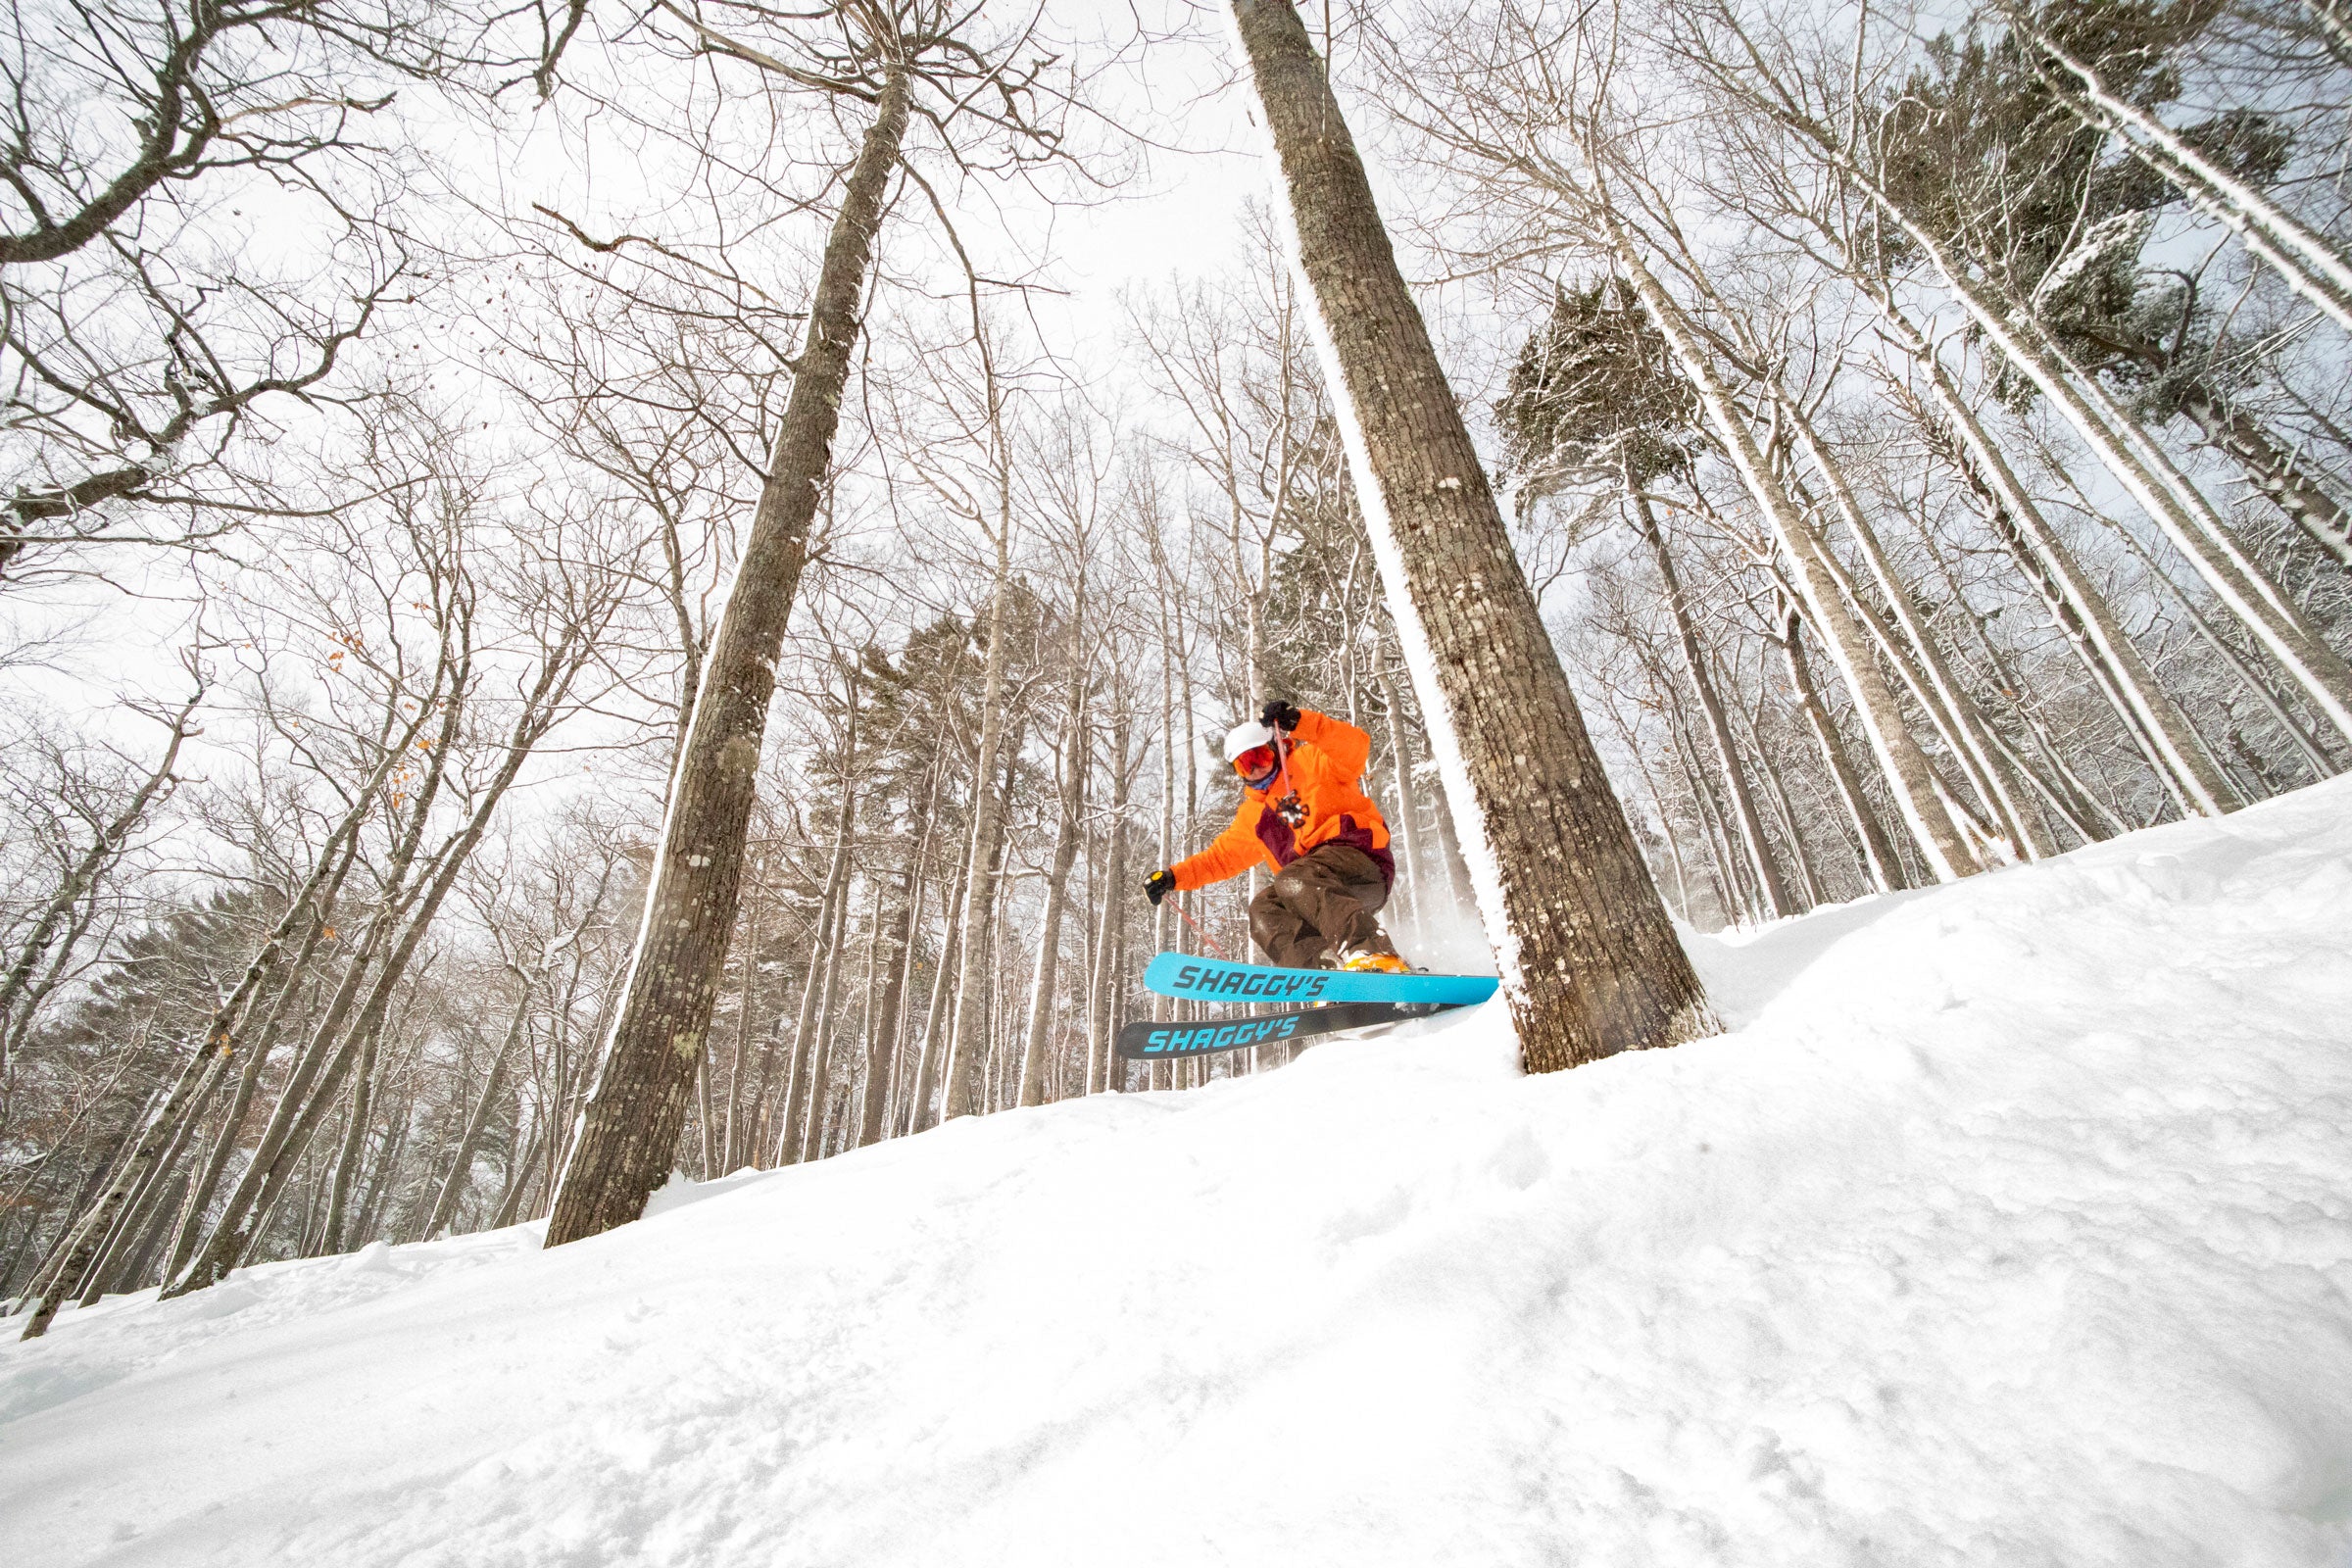 Tree Skiing - Best Skis for Tree Skiing - Best Skis for Glade Skiing